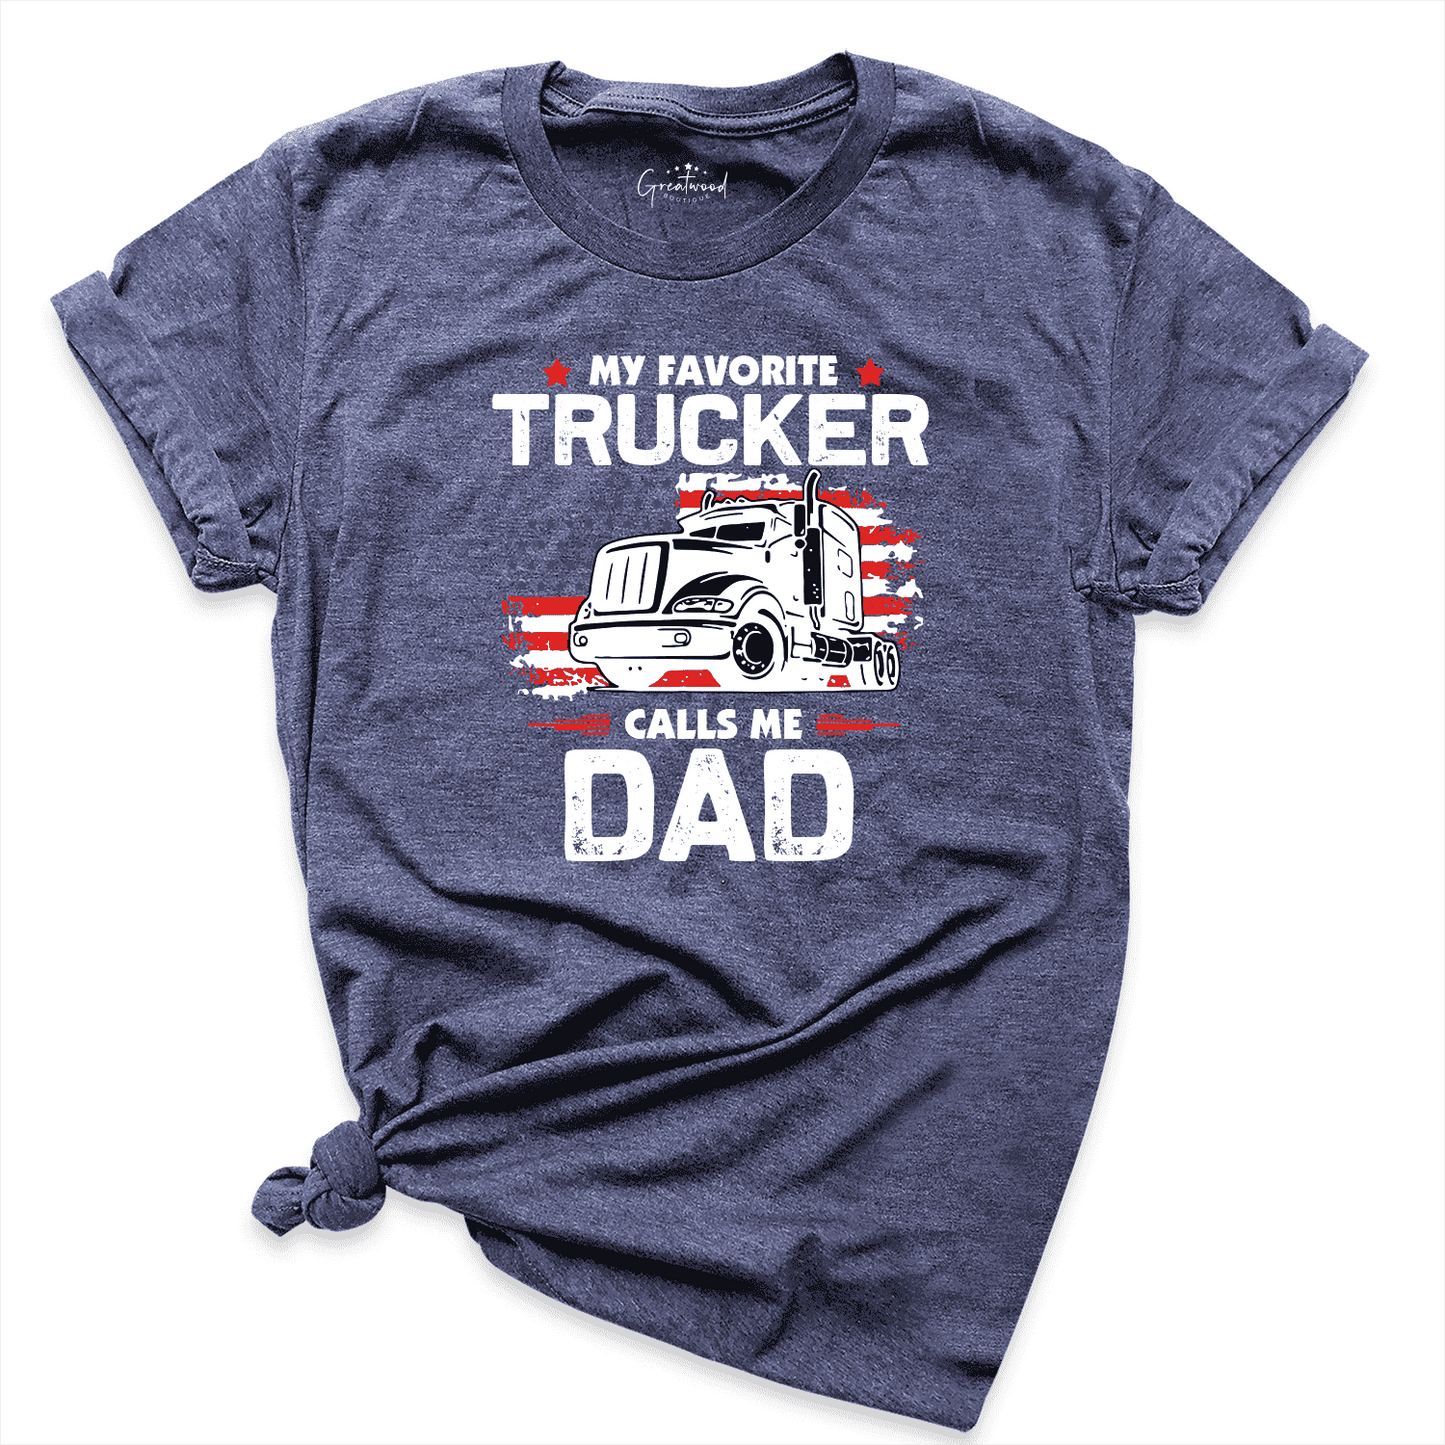 My Favorite Trucker Dad Shirt Navy - Greatwood Boutique